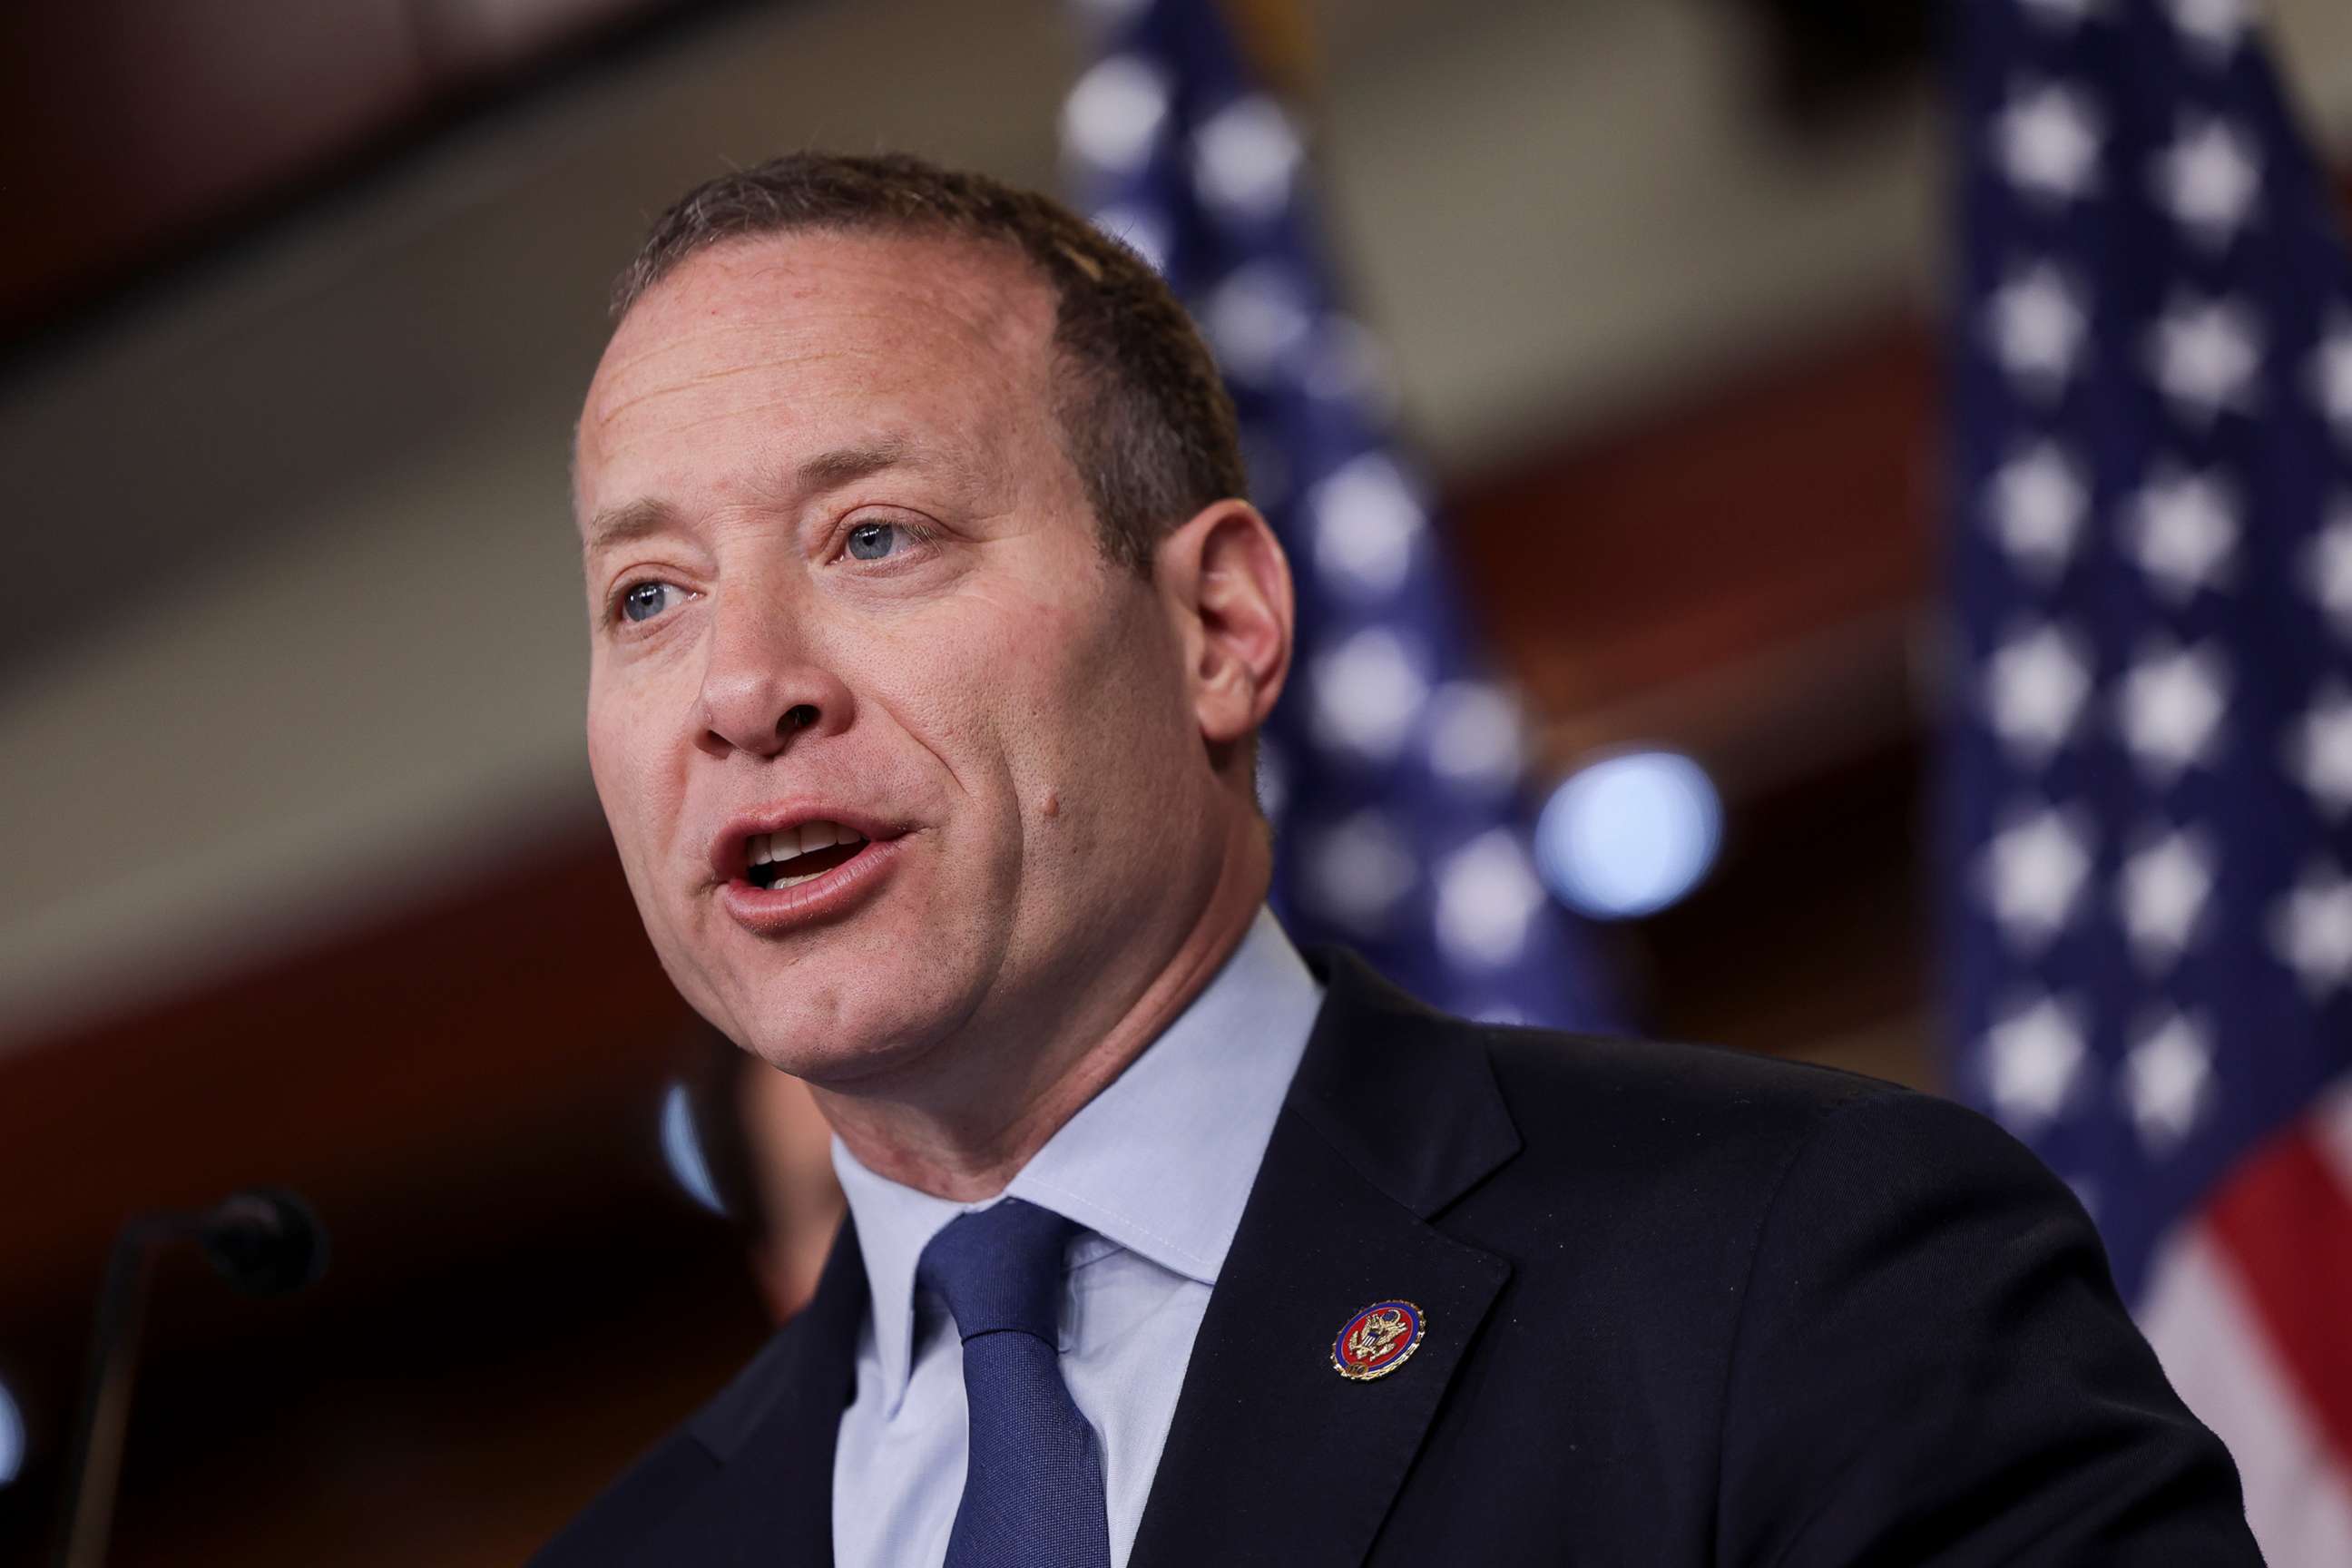 PHOTO: Rep. Josh Gottheimer speaks at a news conference on Capitol Hill in Washington, April 06, 2022.